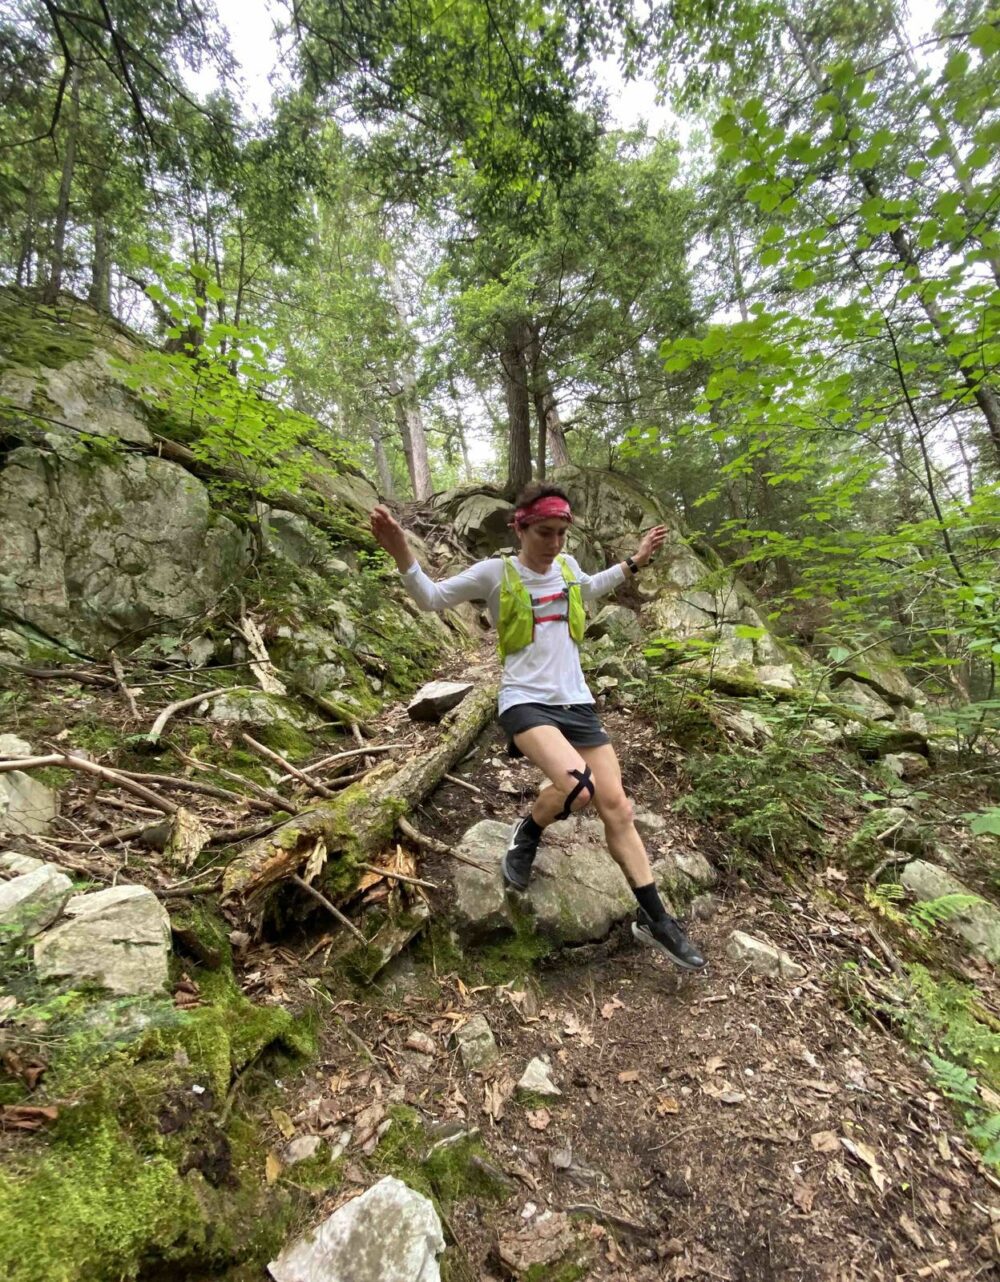 A person wearing a white shirt, green vest, and black shorts is mid-jump on a rocky forest trail. They have a red headband and black knee brace, and the background consists of trees, shrubs, and rocks. The person appears to be trail running or hiking.